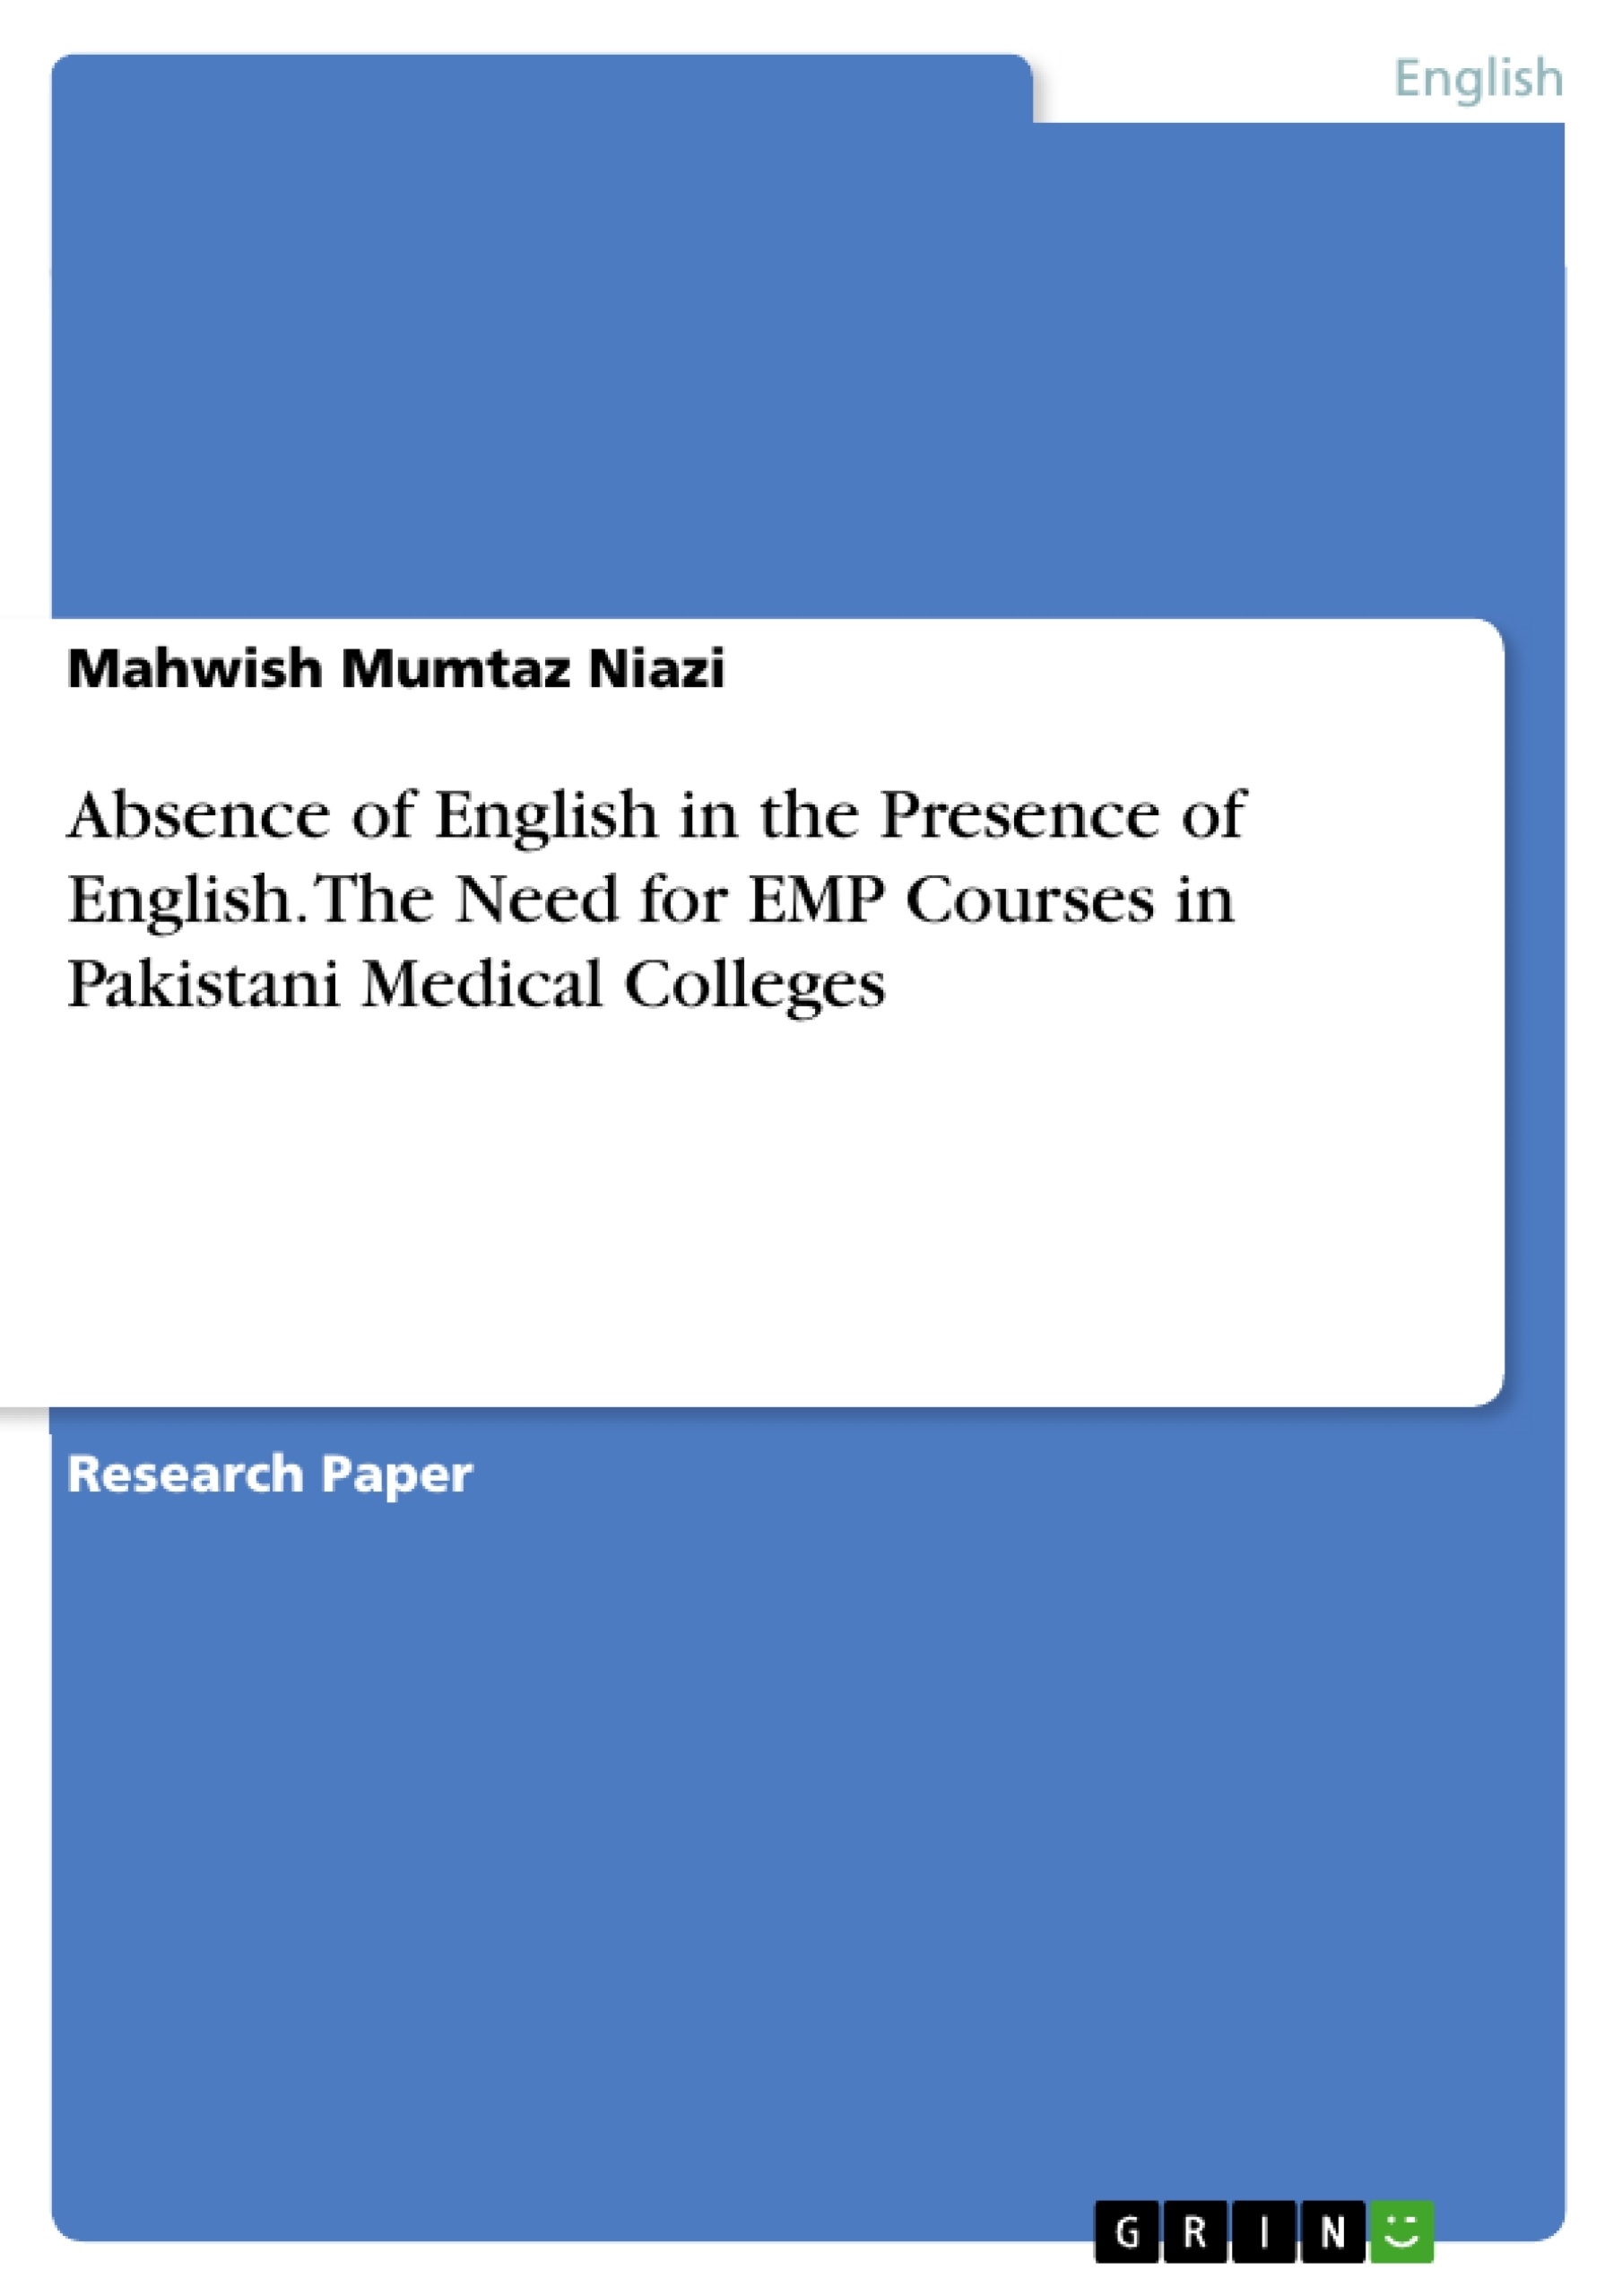 Título: Absence of English in the Presence of English. The Need for EMP Courses in Pakistani Medical Colleges